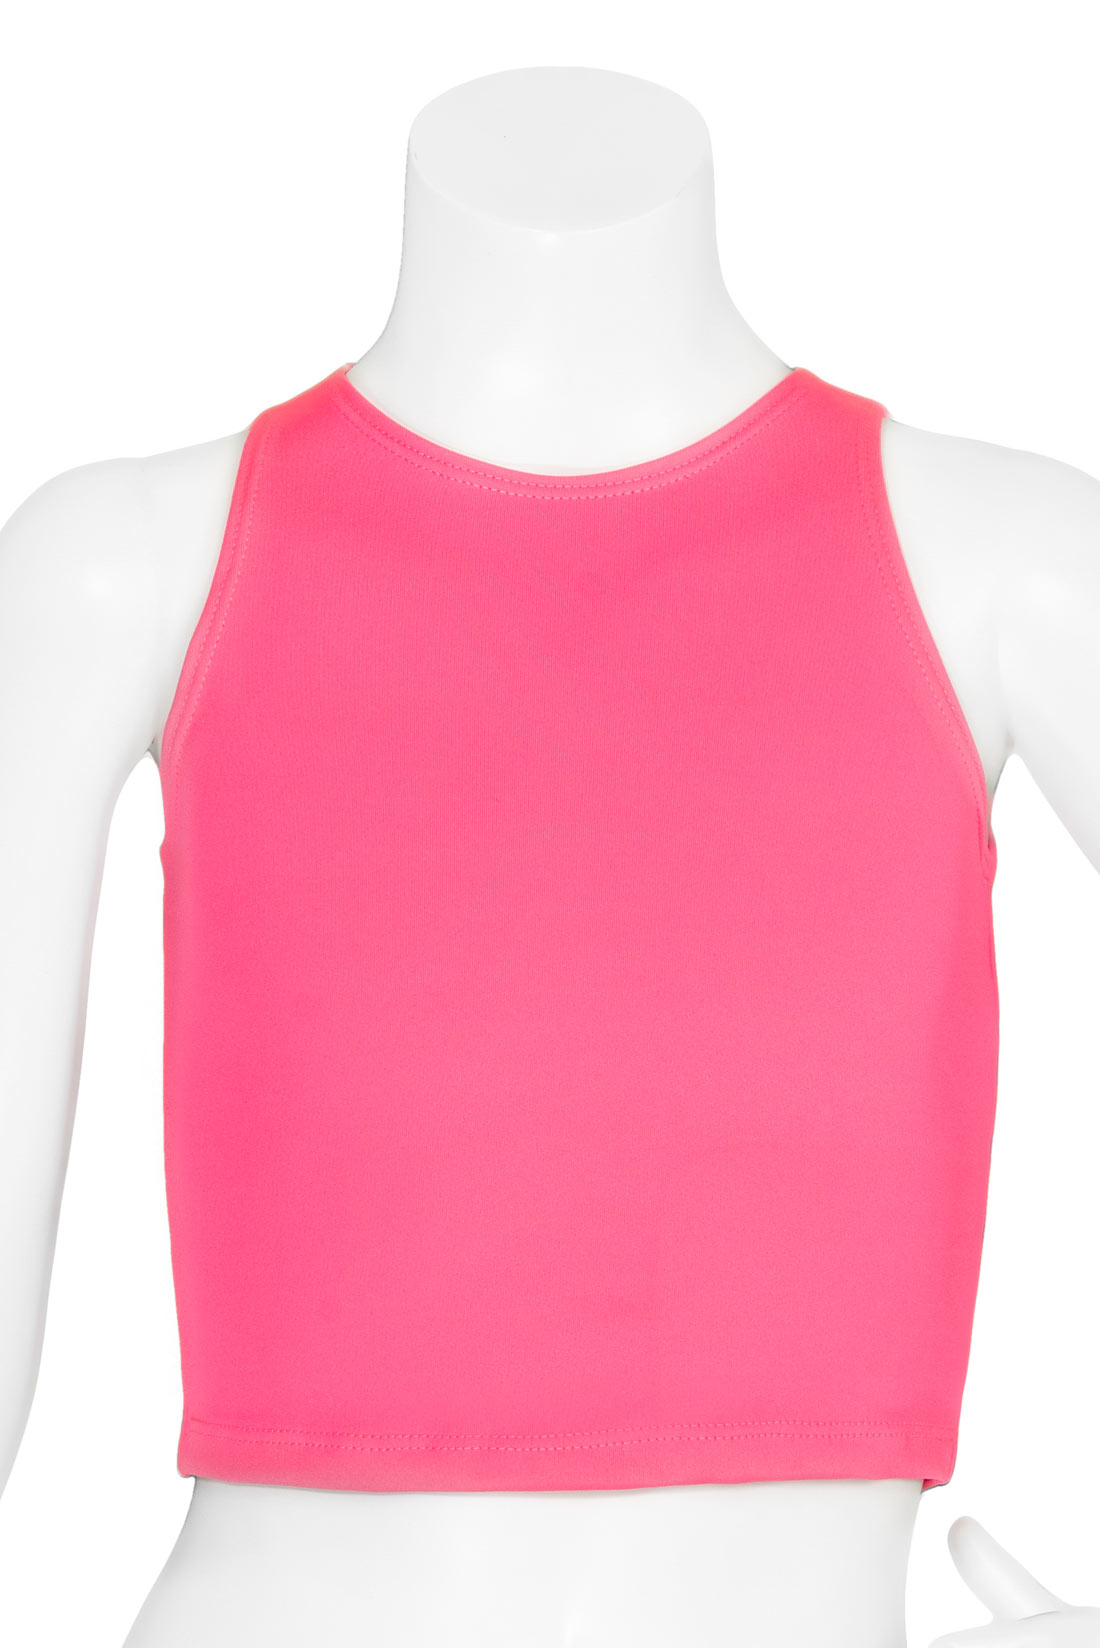 Bright pink sports tank top for girls by Destira, 2024